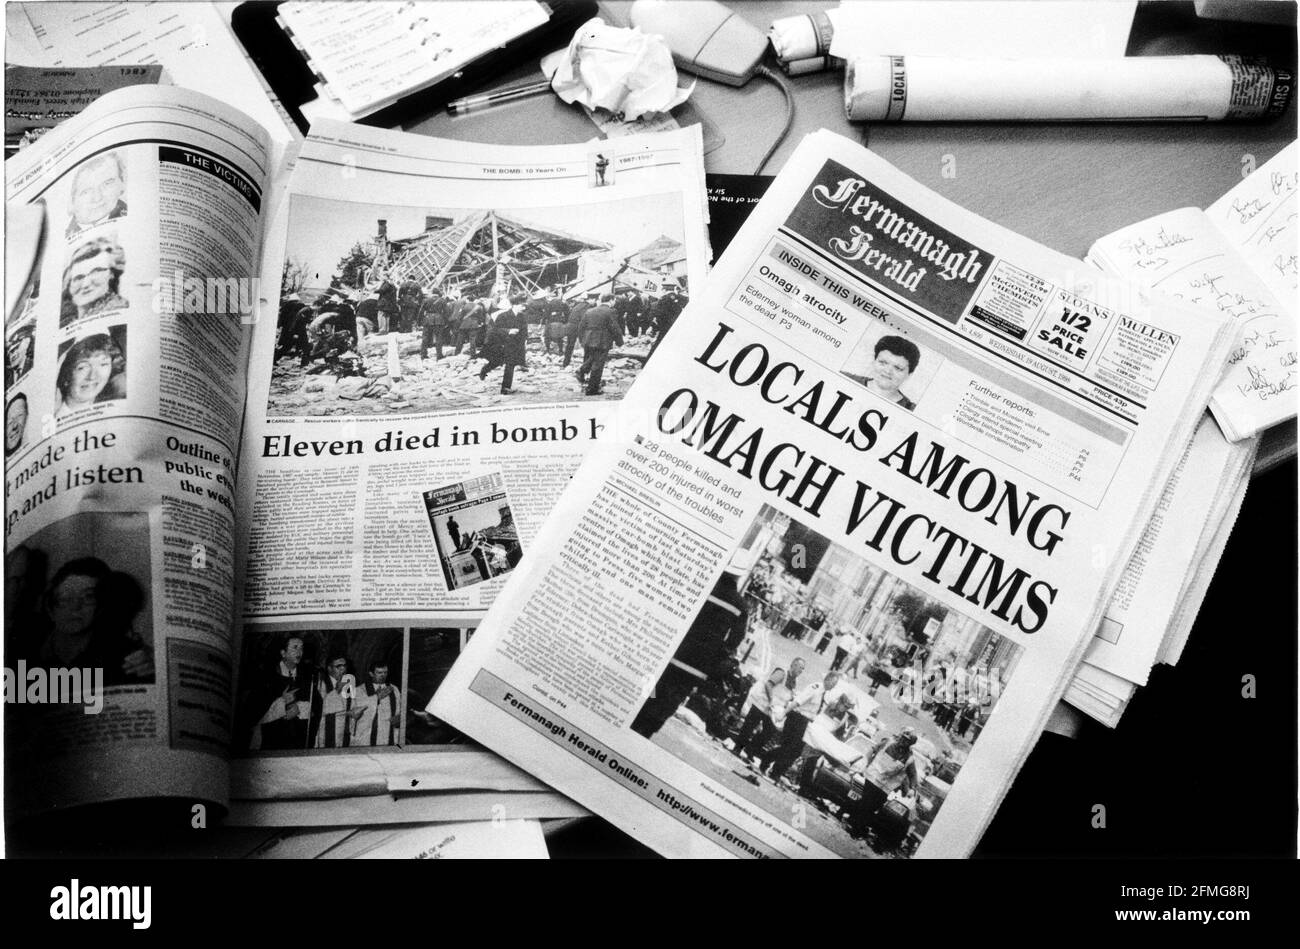 Local papers in Enniskillen reporting the bomb August 1998 blast which killed 11 people in 1987 and the 1998 Omagh bomb blast which killed 28 people Stock Photo